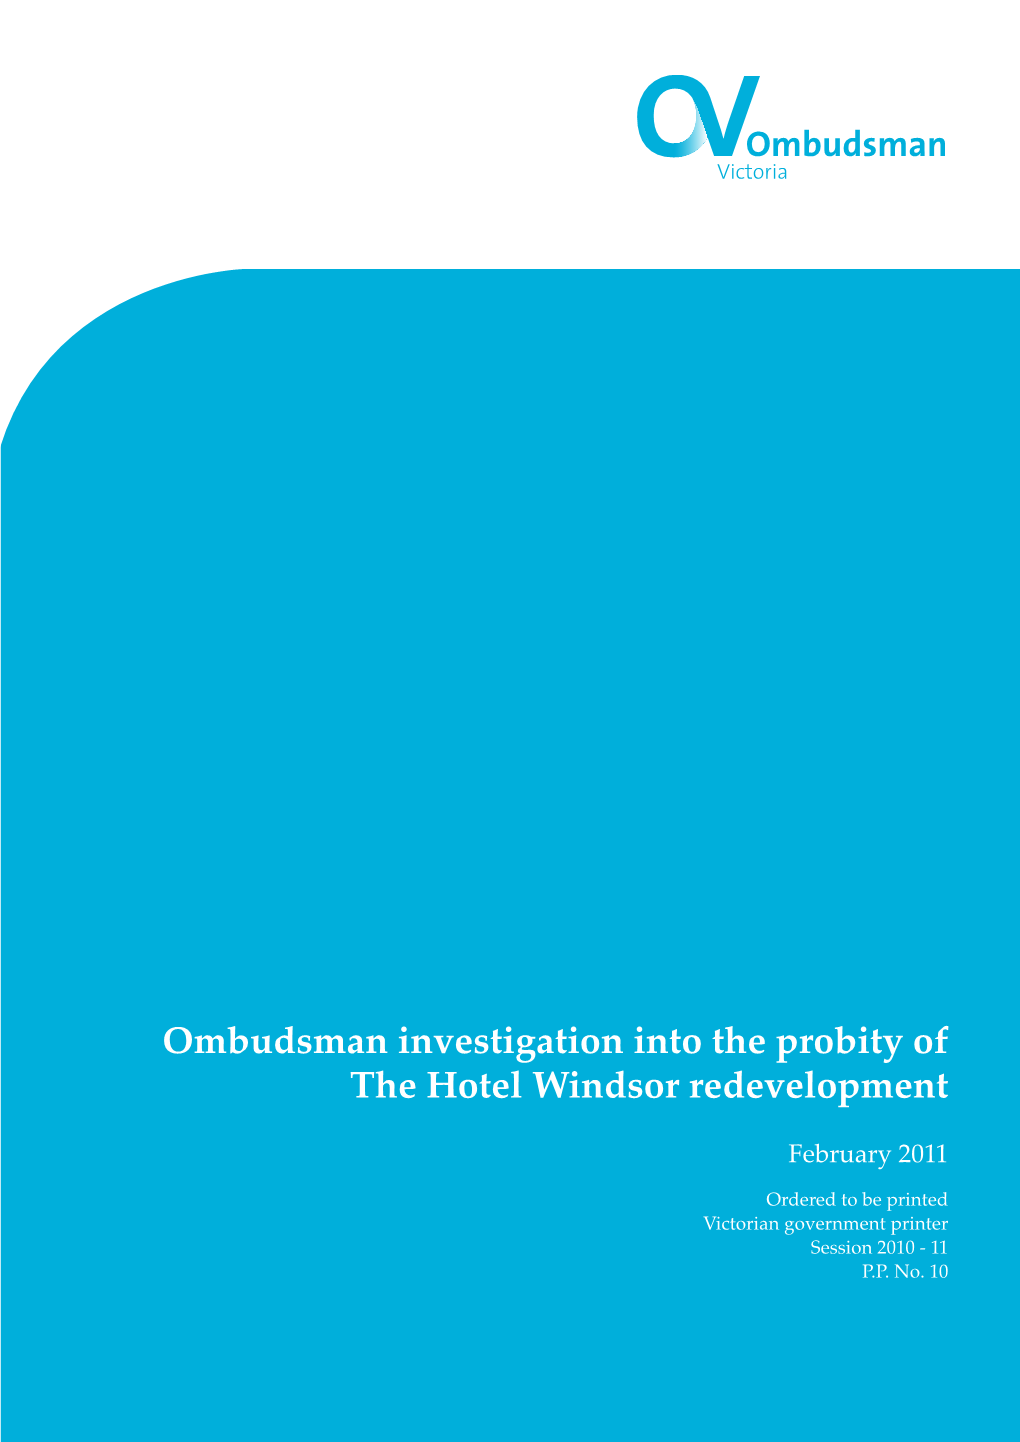 Ombudsman Investigation Into the Probity of the Hotel Windsor Redevelopment